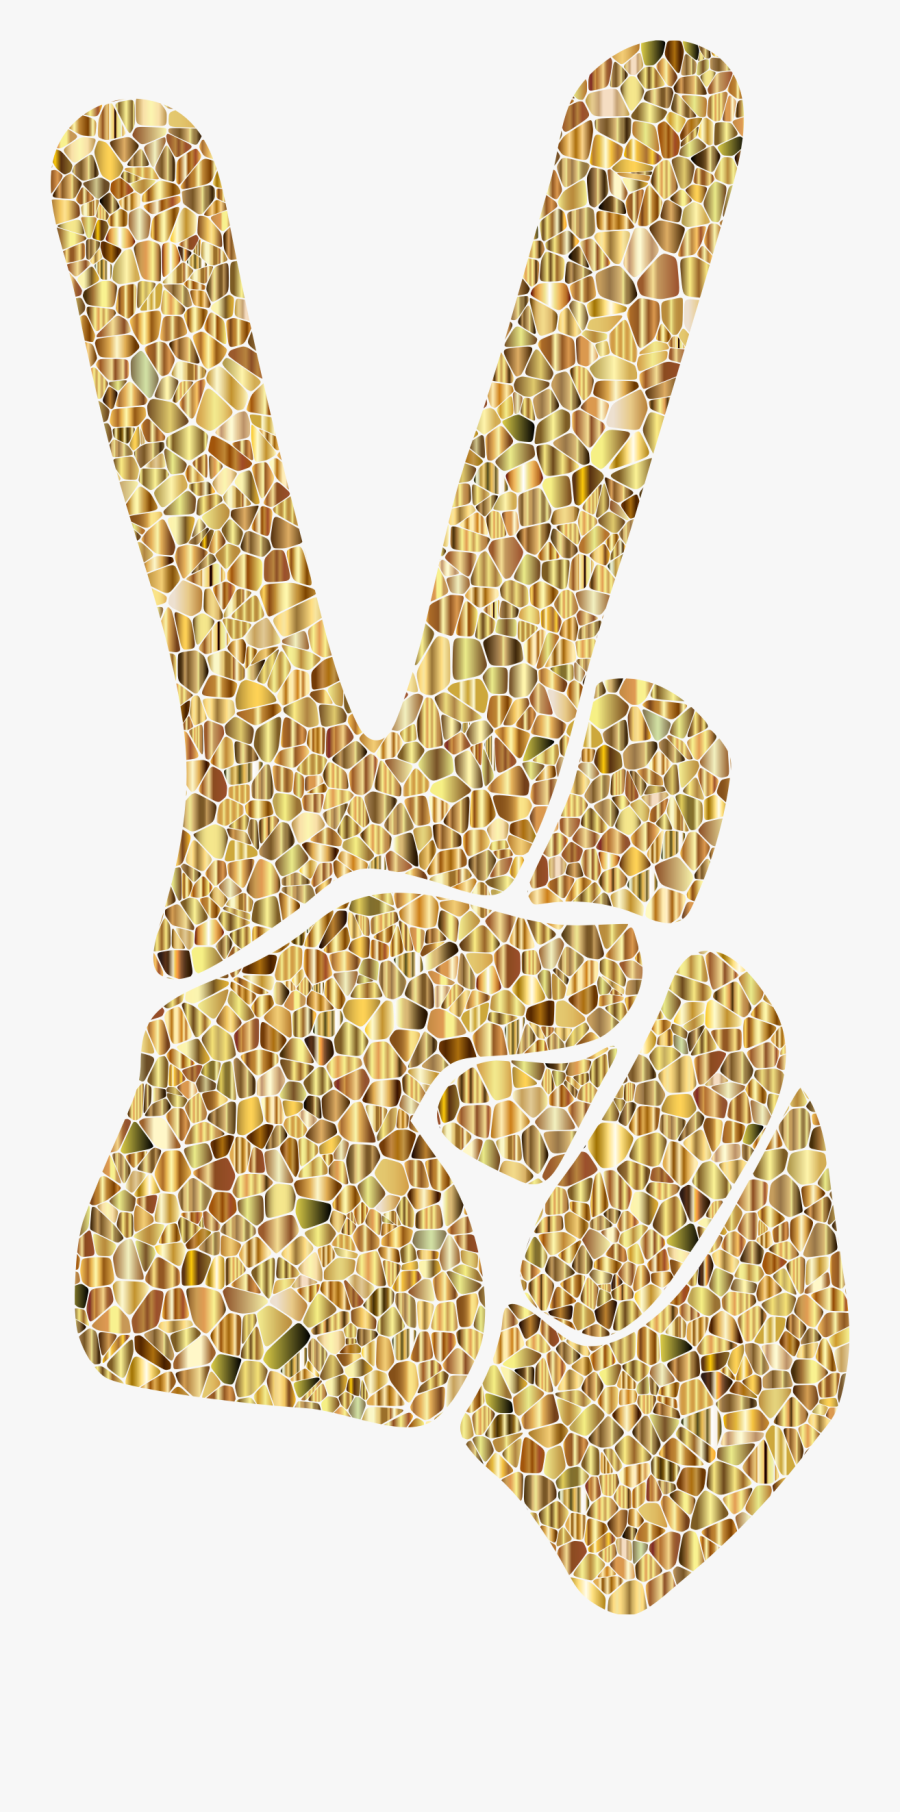 Gold Tiled Peace Sign Silhouette Smoothed No Background - Peace Sign Background Fingers, Transparent Clipart